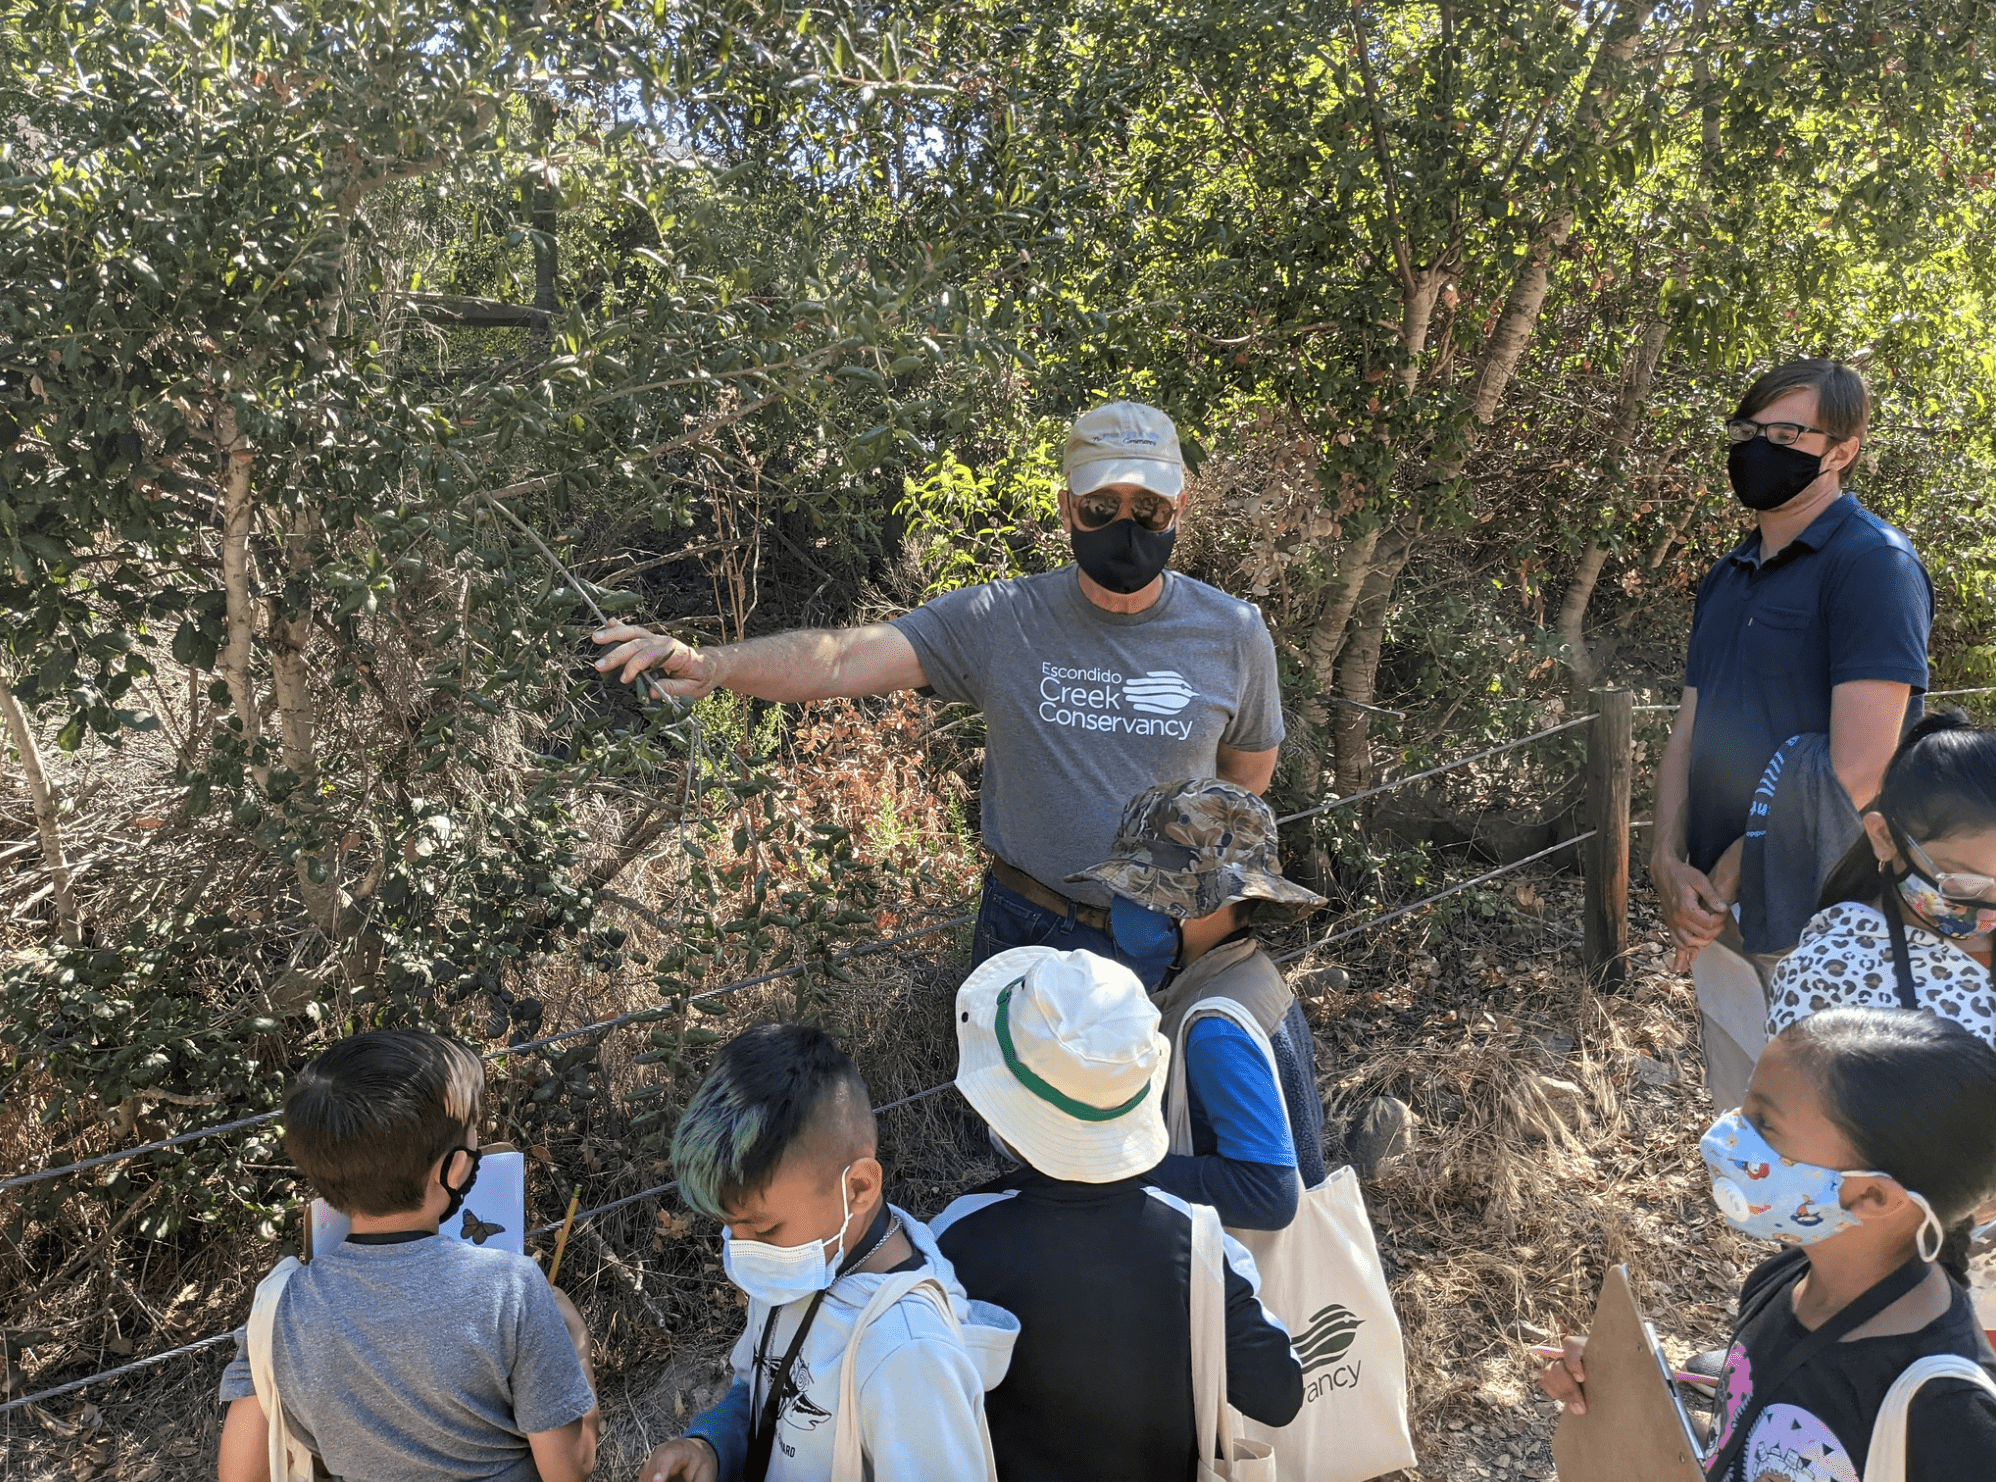 An Escondido Creek Conservancy volunteer in a grey t-shirt, black mask and baseball camp points out natural plant features along a hiking trail to a group of elementary students.